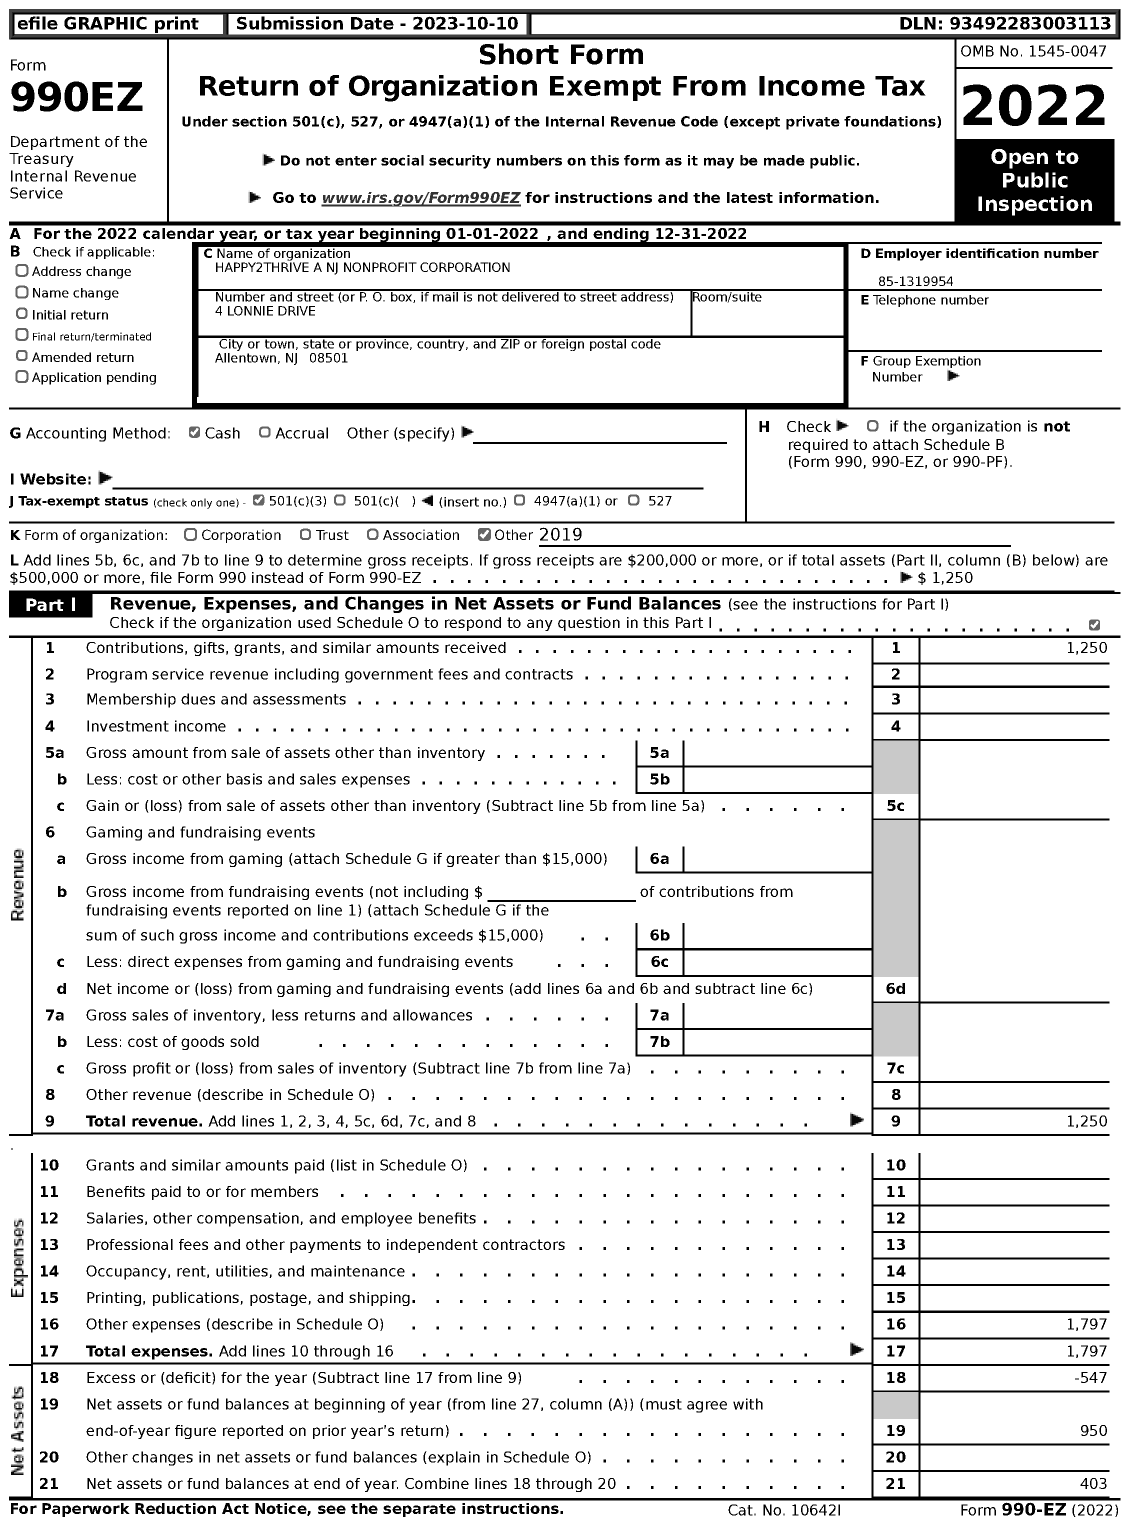 Image of first page of 2022 Form 990EZ for Happy2thrive A NJ Nonprofit Corporation